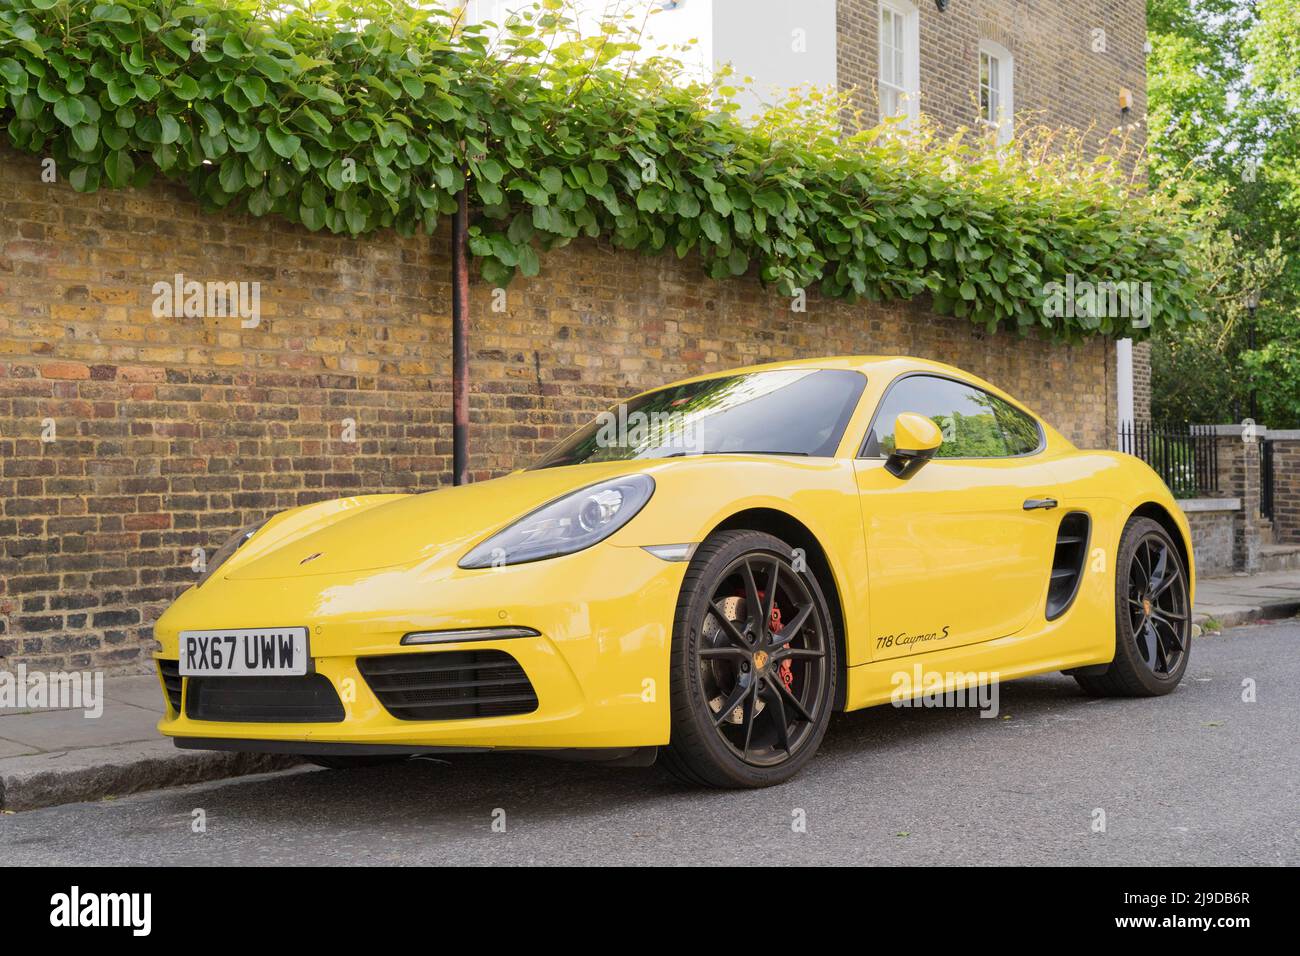 front offside view of a yellow PORSCHE parks at road side on street parking bay, Greenwich London England Stock Photo